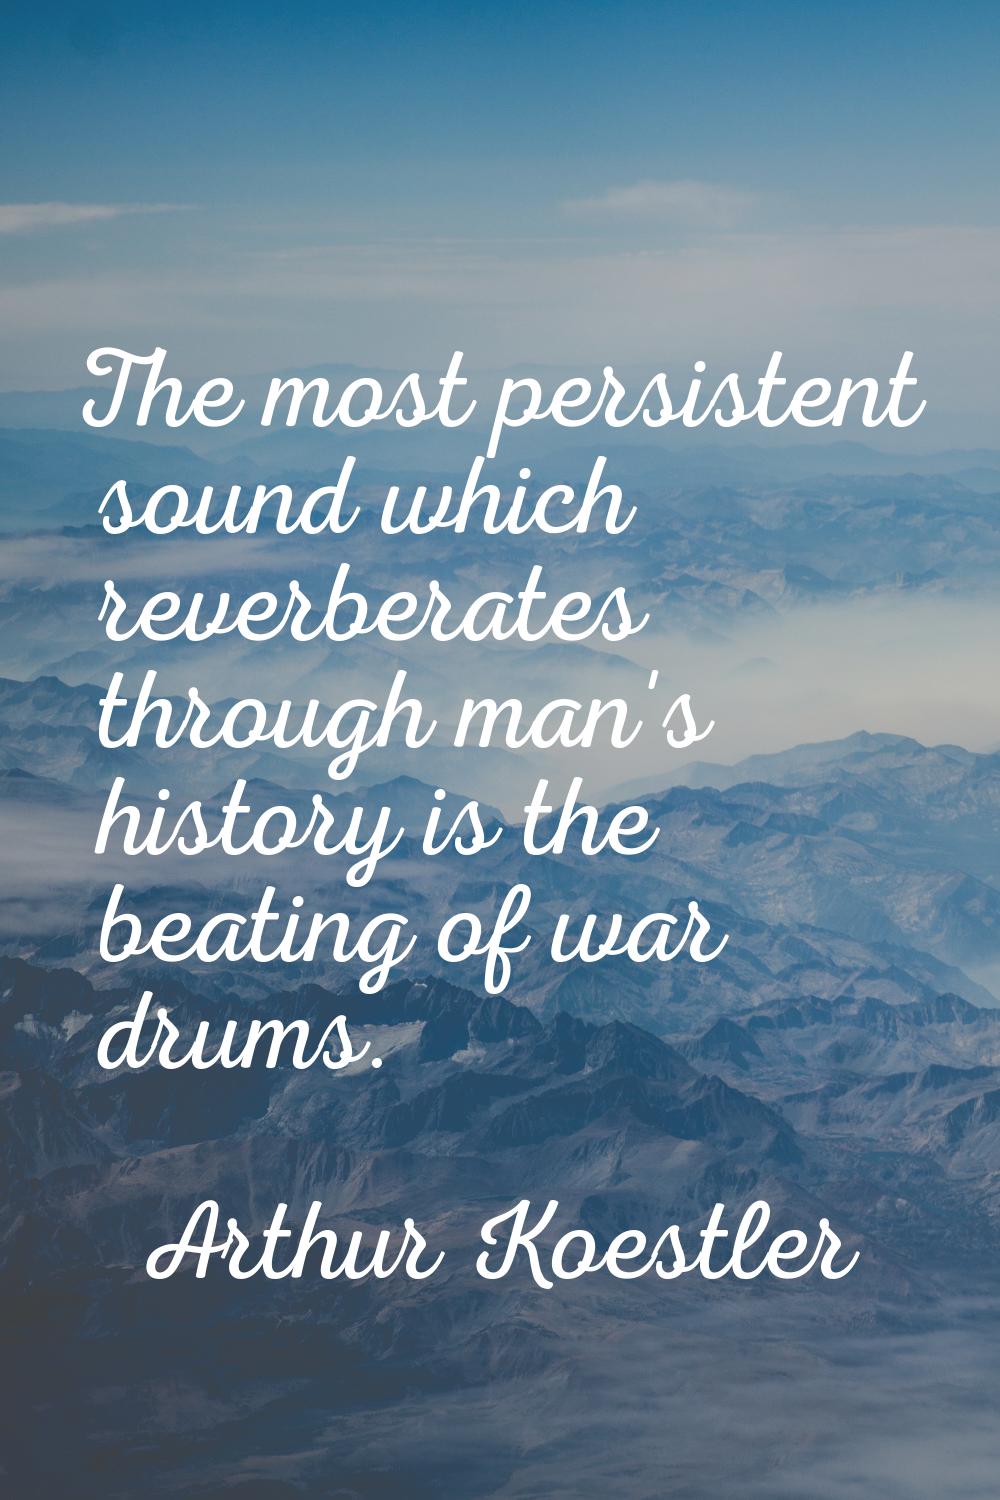 The most persistent sound which reverberates through man's history is the beating of war drums.